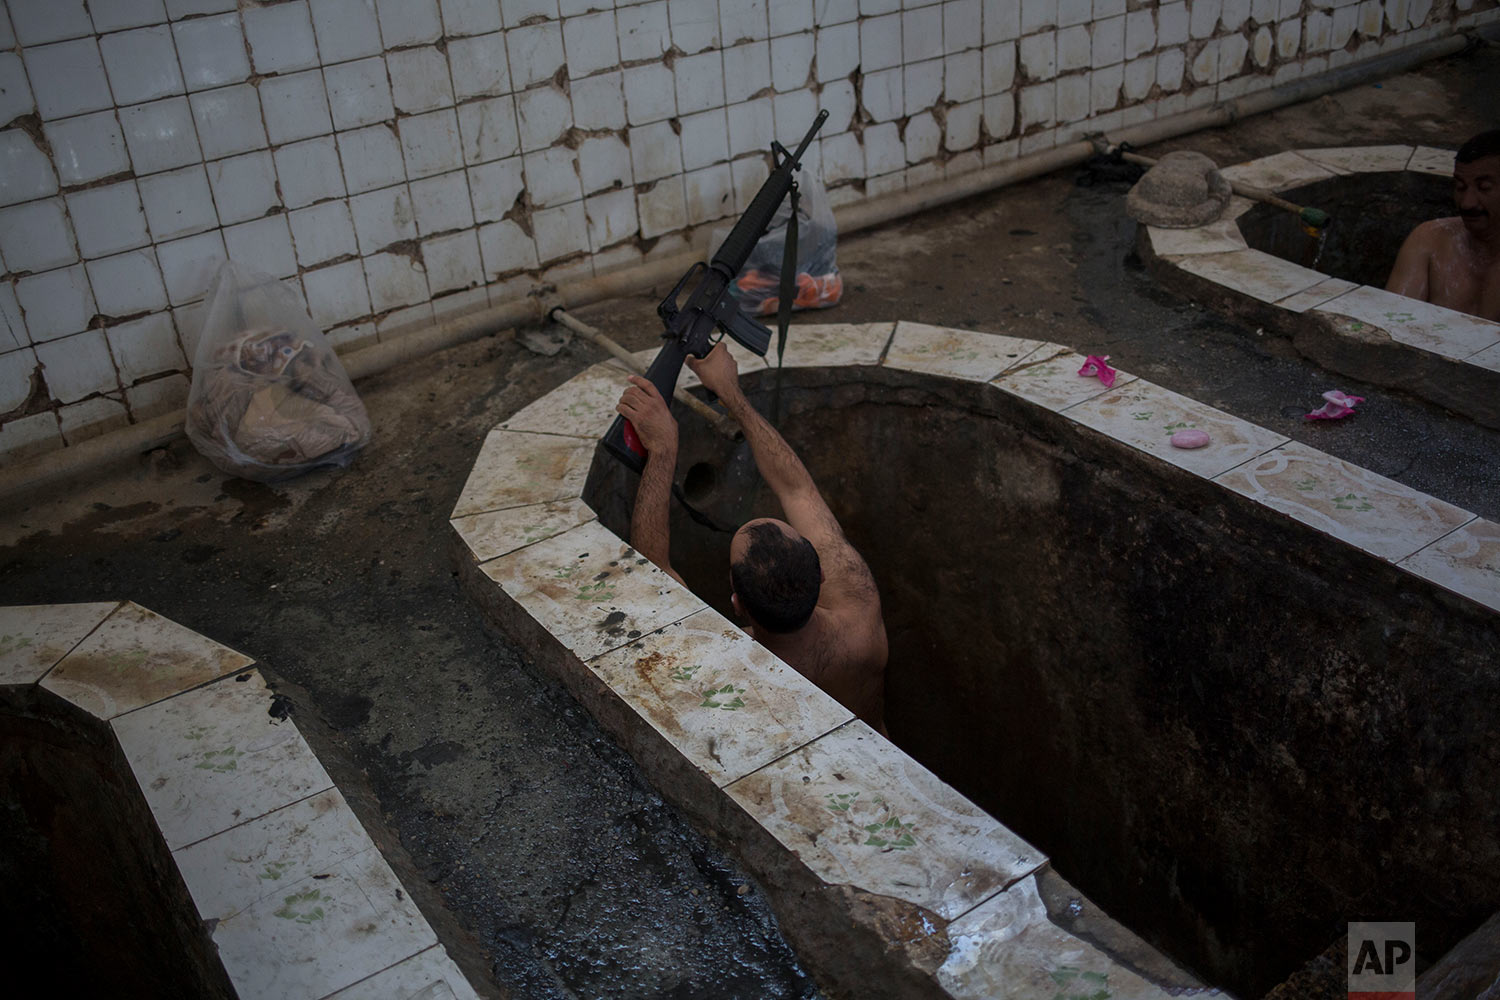  A federal police officer puts his machine gun on the edge of the bath in the Hamam Alil spa, south of Mosul, Iraq, Thursday April, 27, 2017. The spa reopened several months ago after the town was liberate from the Islamic State group. Many Iraqi soldiers visit the spa, located half an hour south of Mosul, in between fighting against the Islamic State group for relaxation. (AP Photo/Bram Janssen) 